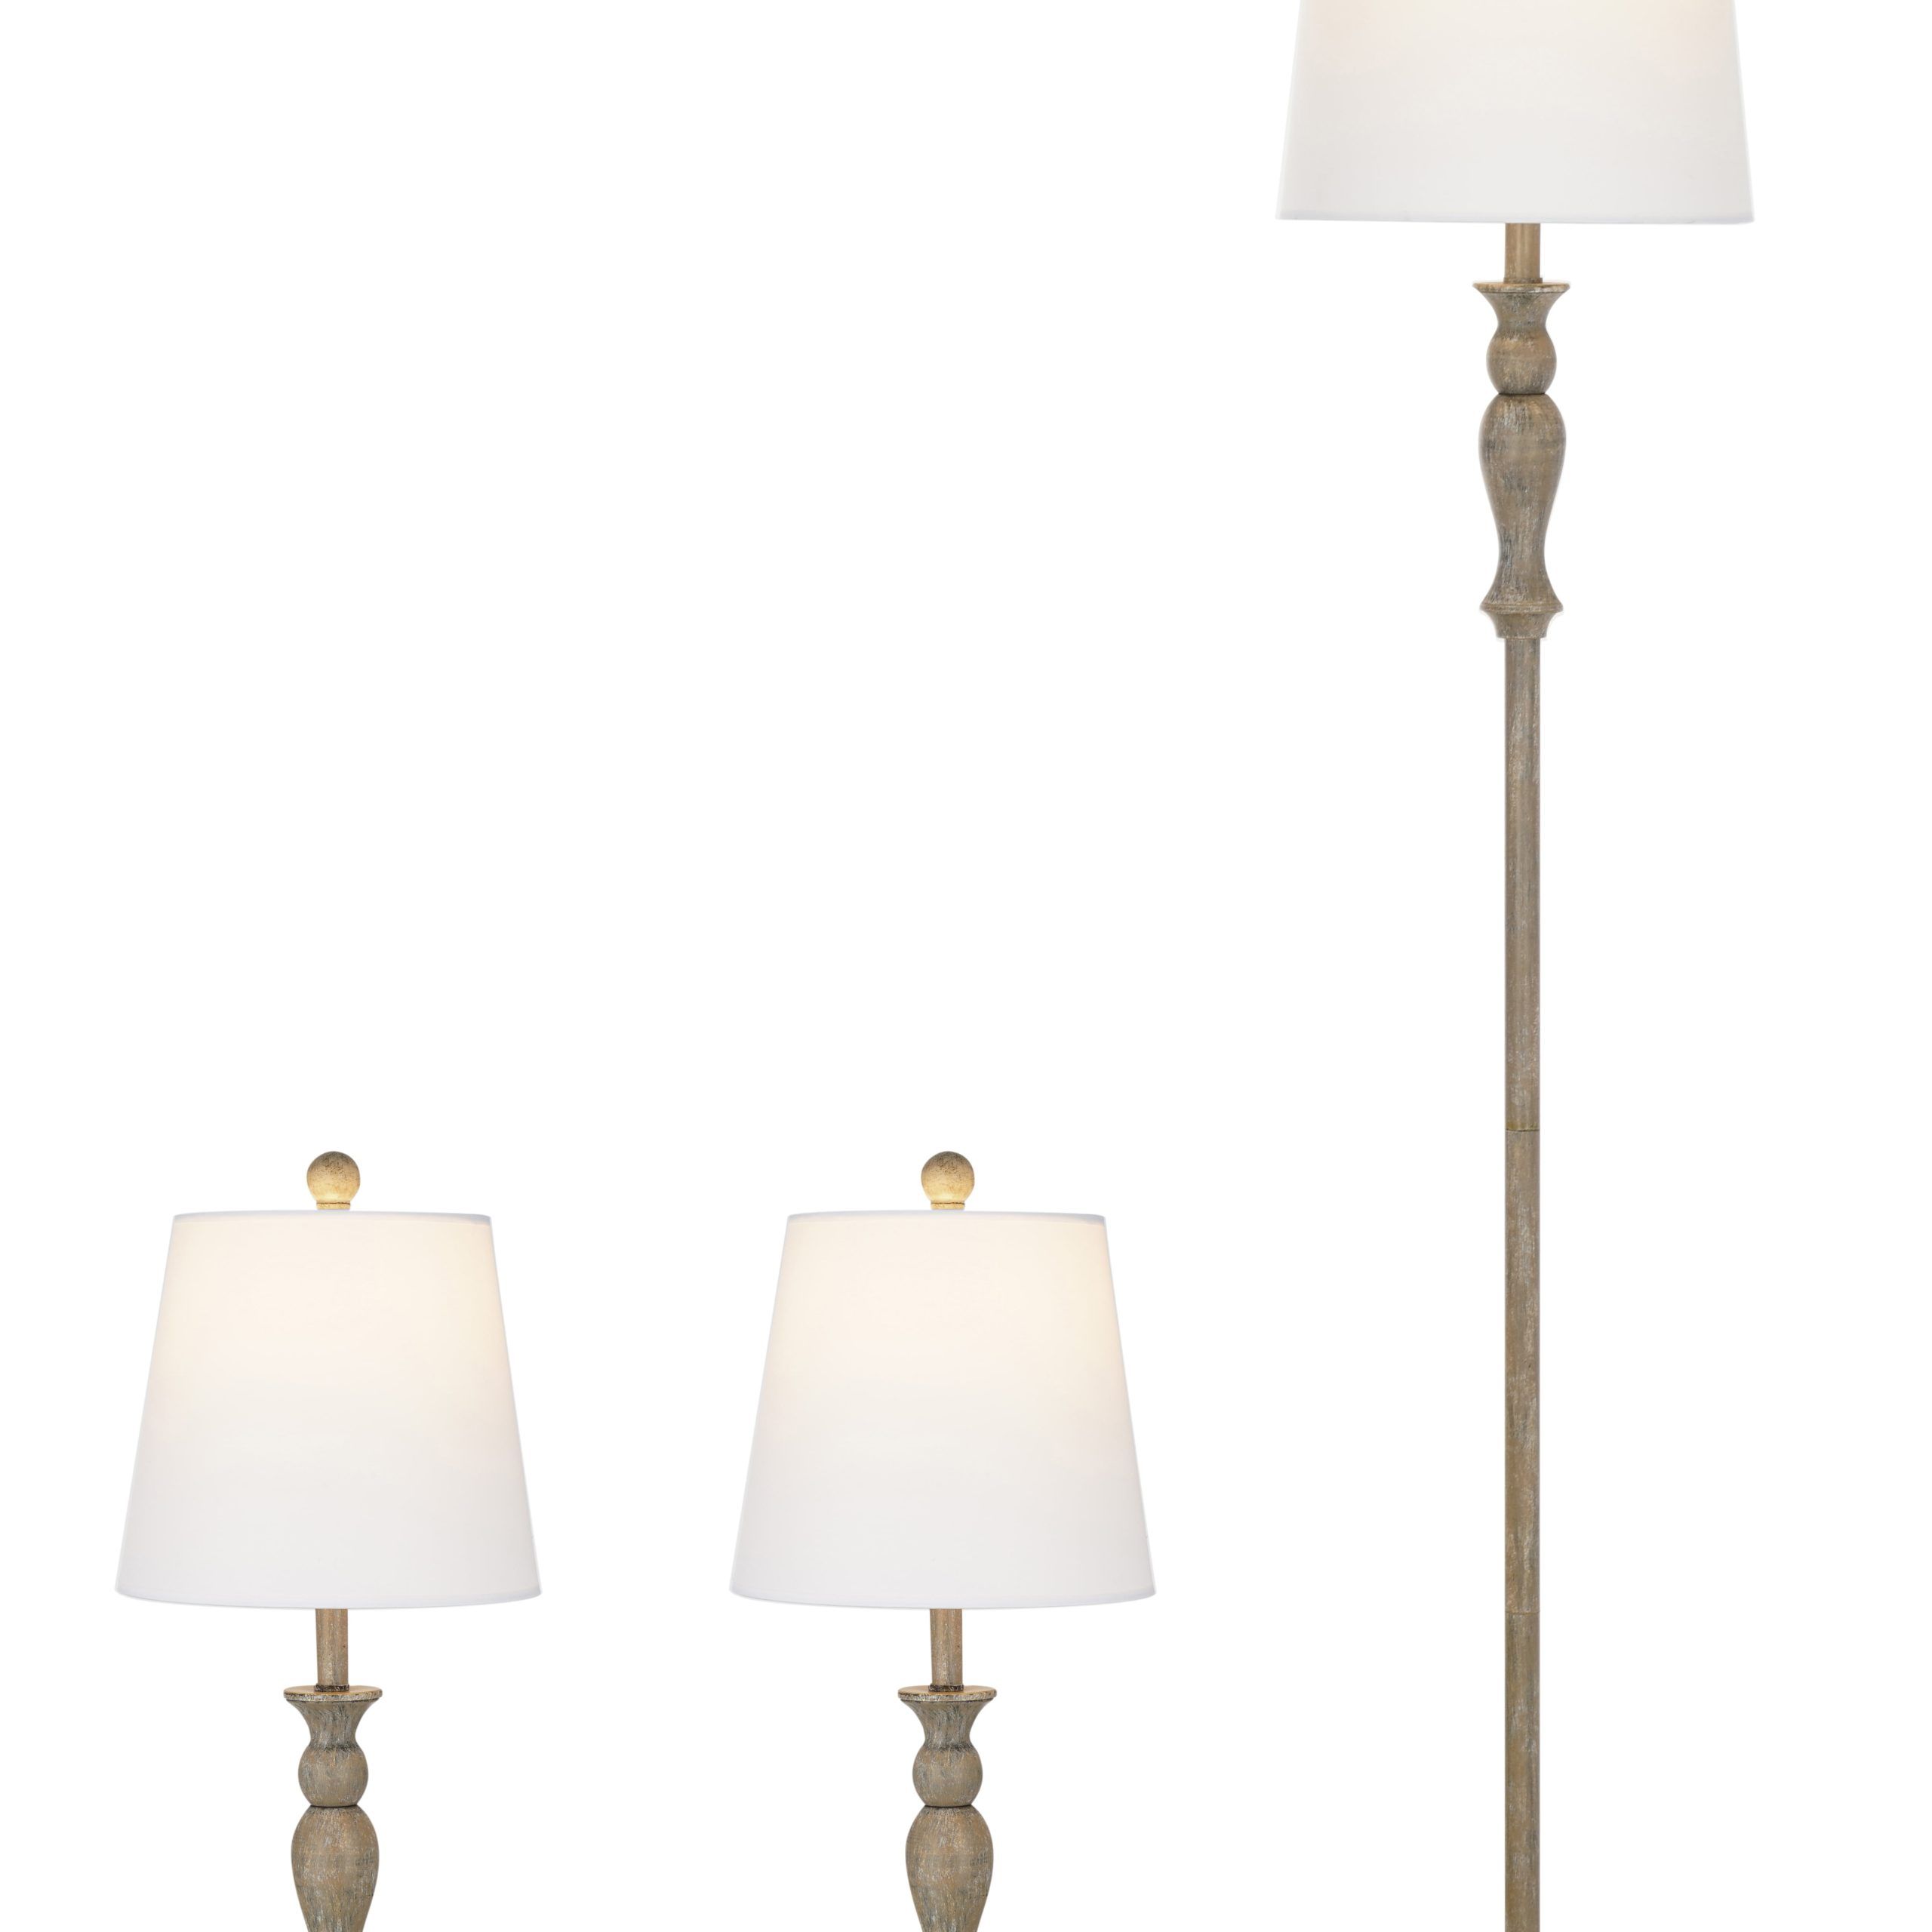 3 Piece Set Standing Lamps With Favorite Better Homes & Gardens Modern Farmhouse 3 Pack Table And Floor Lamp Set,  Wood – Walmart (View 7 of 10)